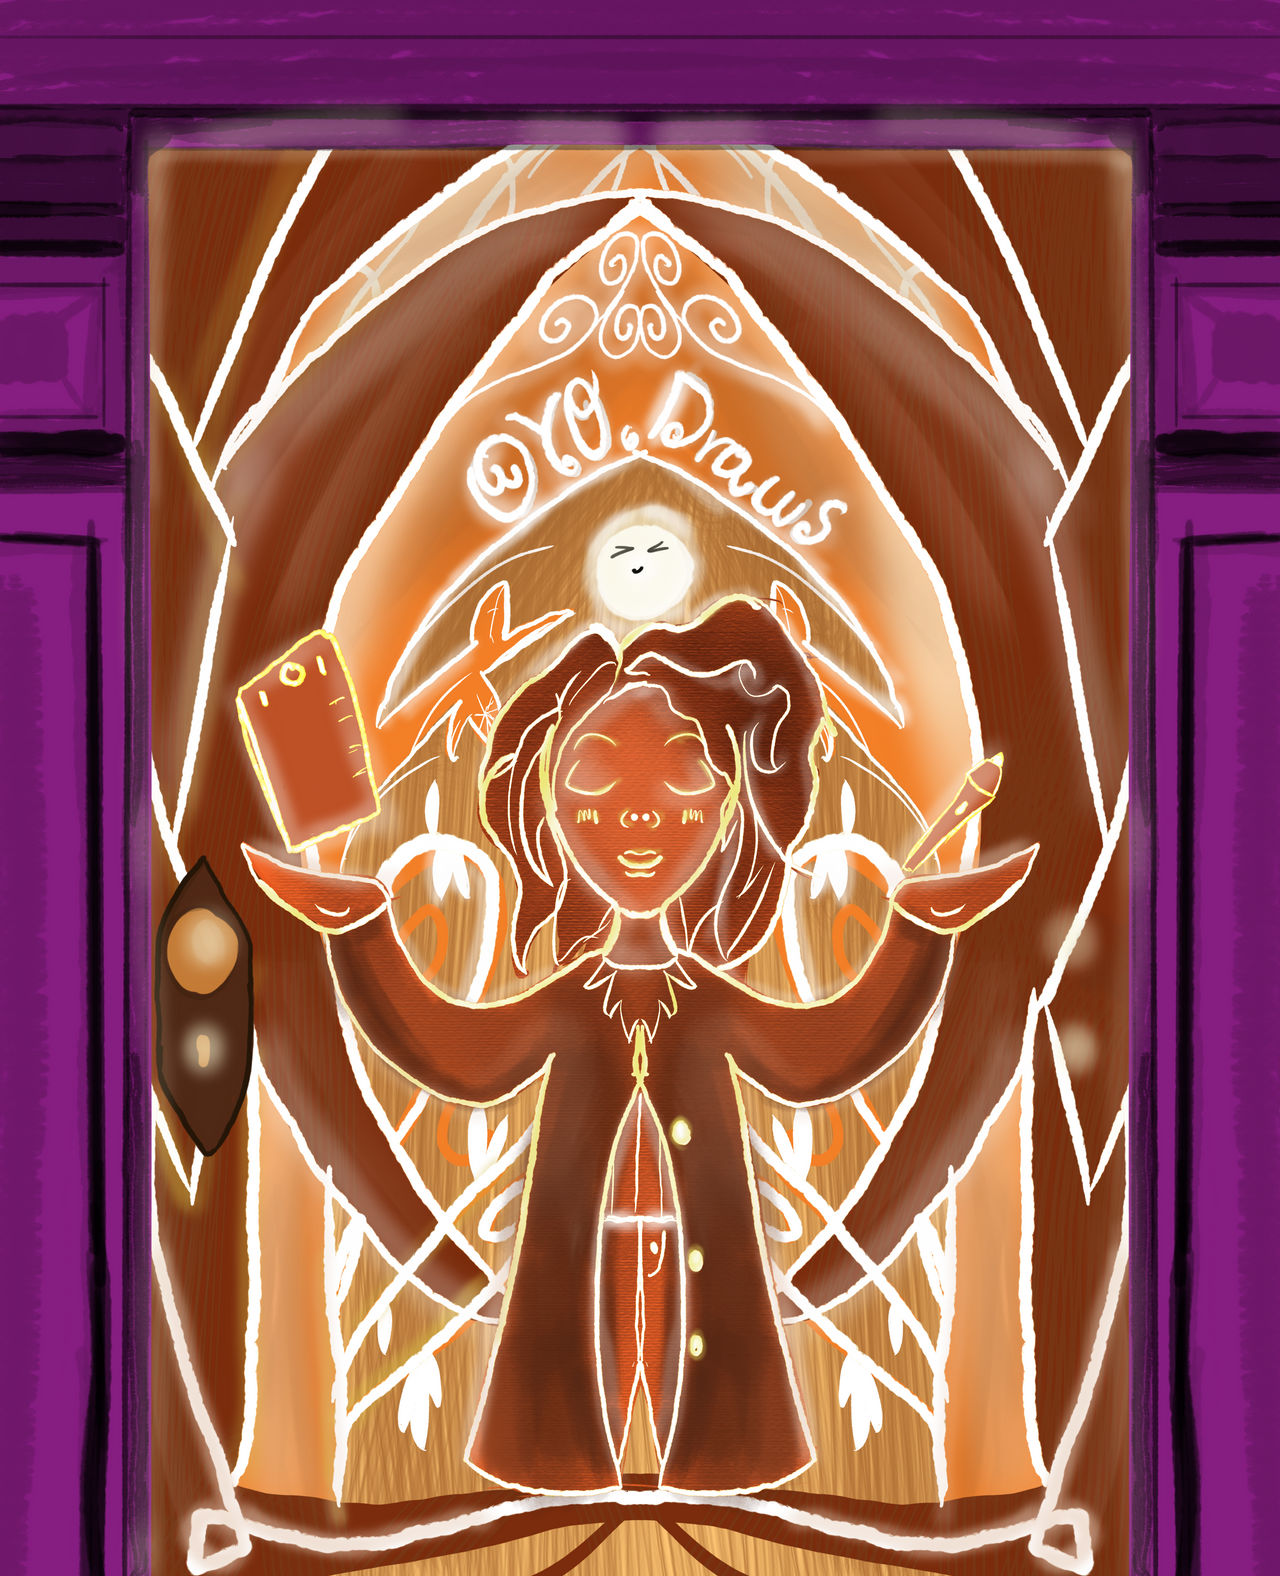 I edited some fan art online to make Encanto doors with powers for